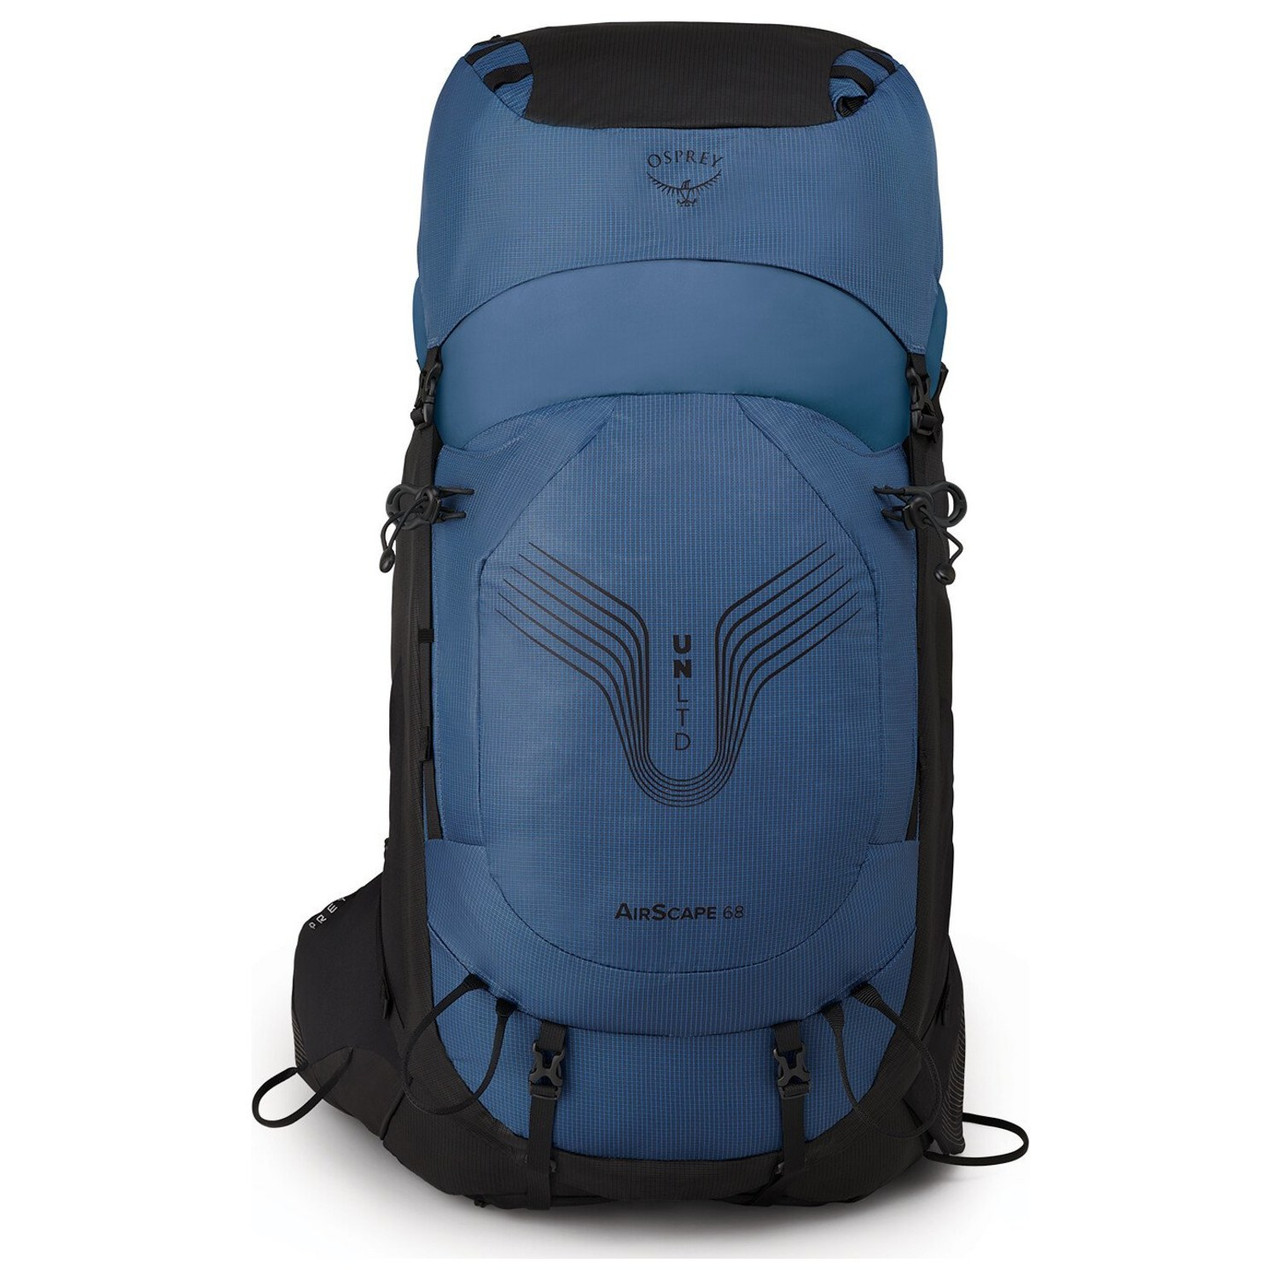 osprey-airscape-unltd-review-testing-ospreys-brand-new-pack